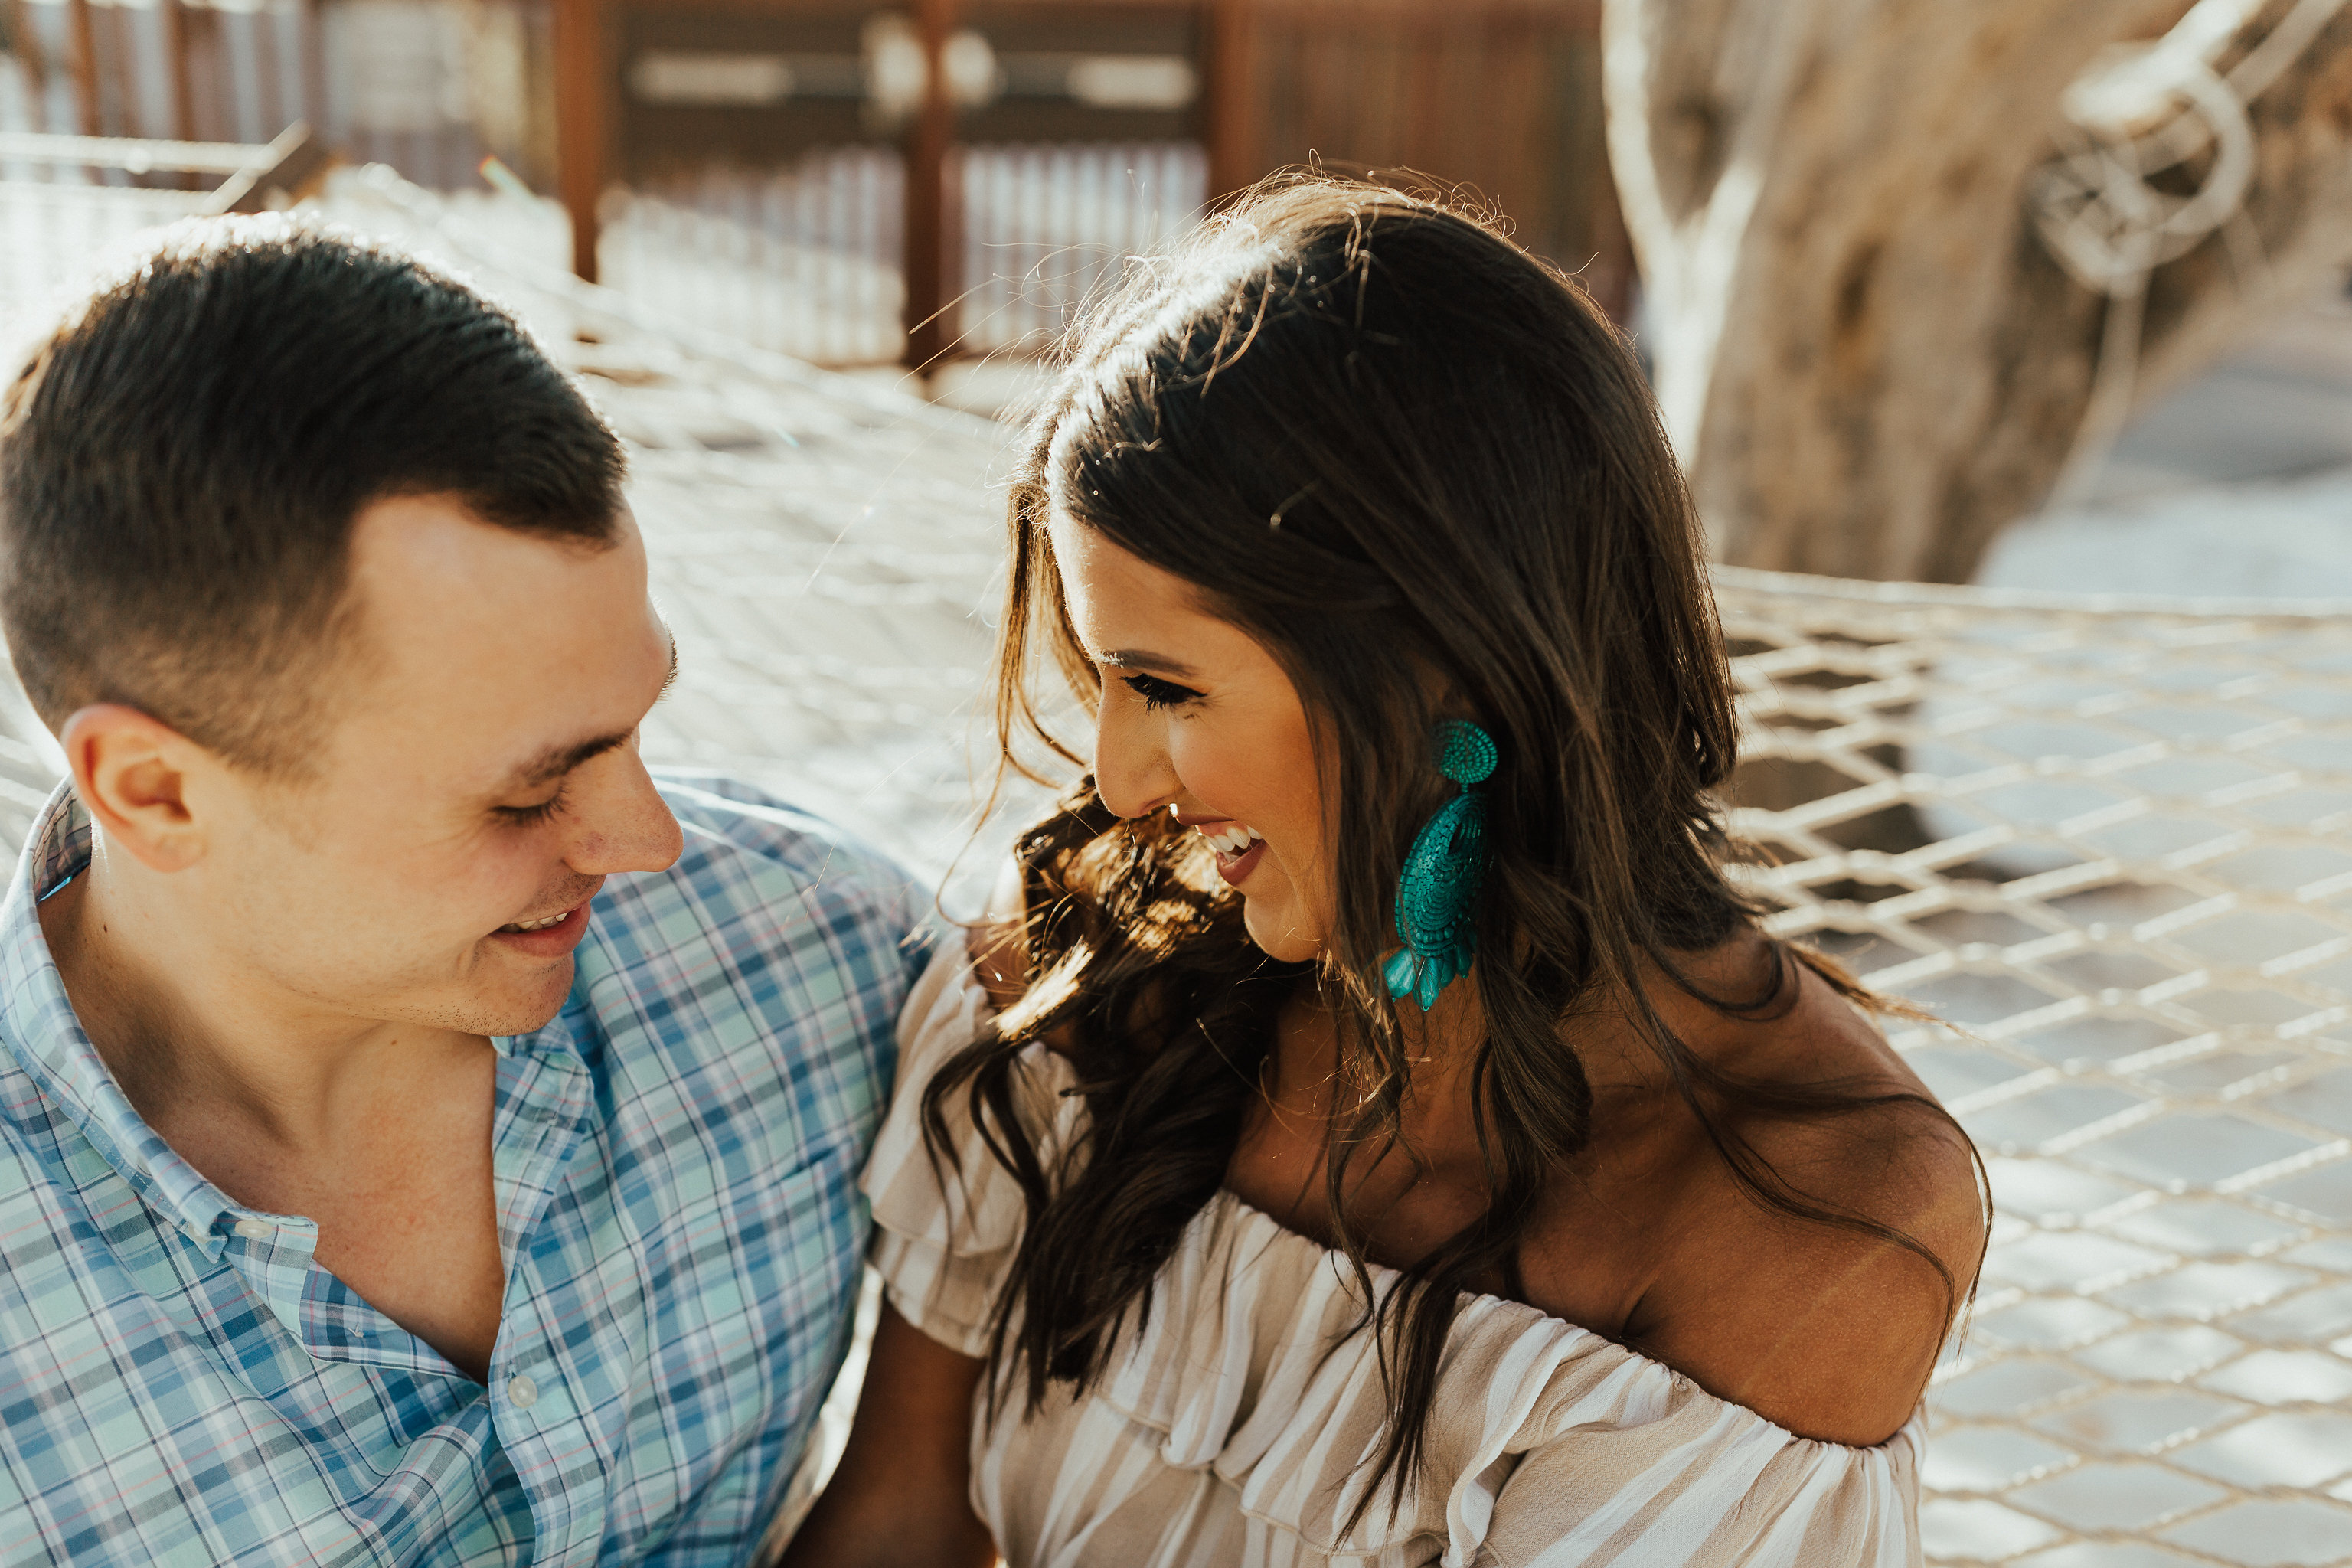 ruffle two piece set, beach style, beach fashion, beach outfits, vacation outfits, couples outfits, couples fashion, two piece set, lovers and friends set, lovers and friends outfits, turquoise earrings, turquoise statement earrings, kenneth jay lane beaded earrings // grace wainwright a southern drawl